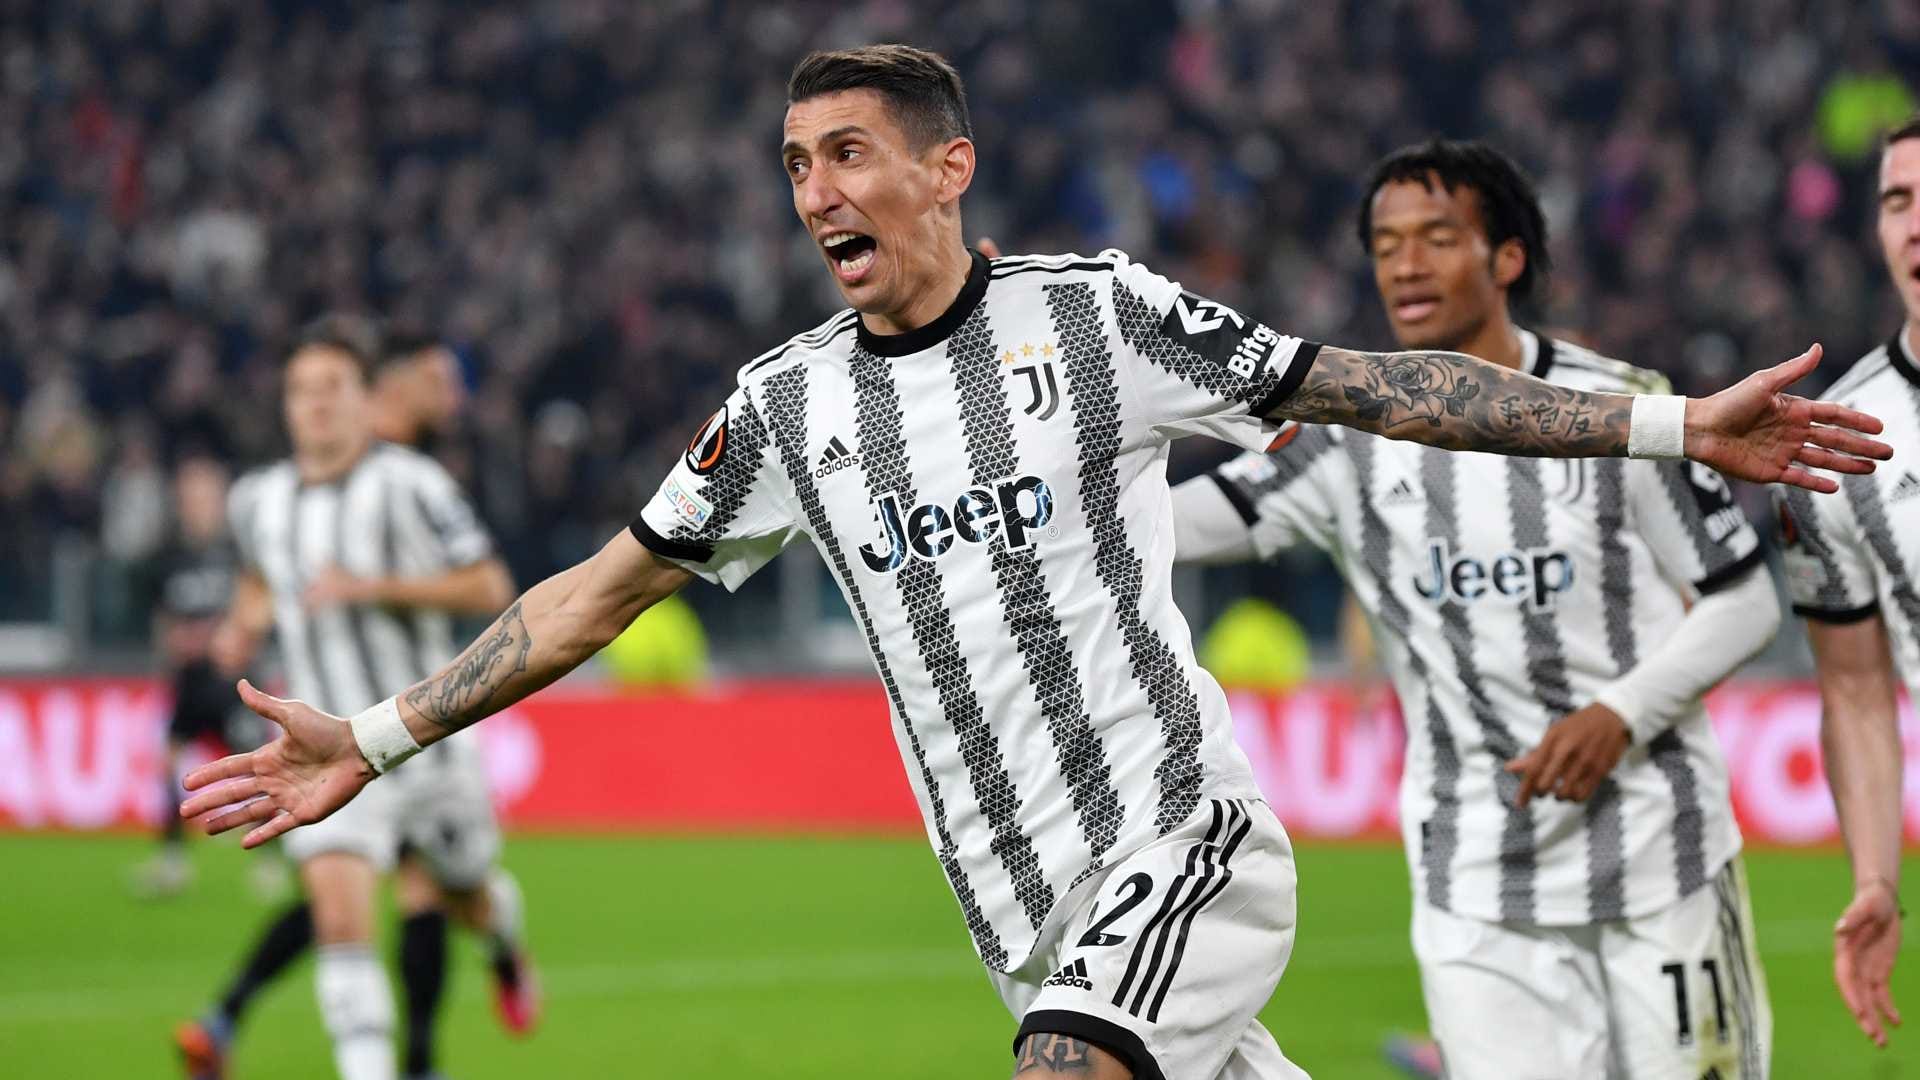 Juventus vs Verona Where to watch the match online, live stream, TV channels and kick-off time Goal UK